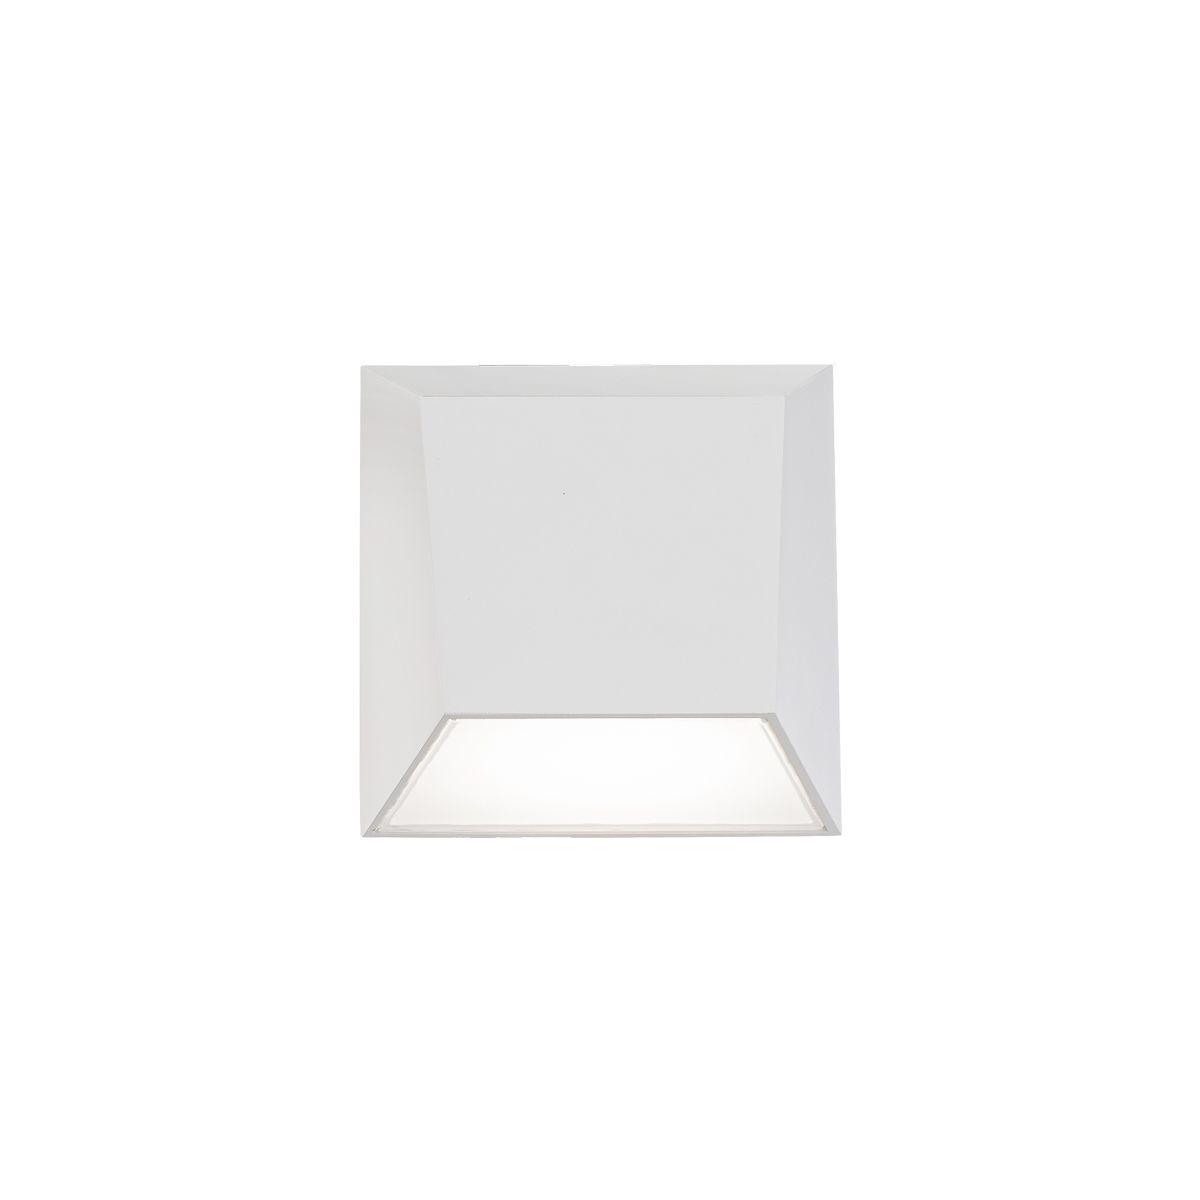 Atlantis 6 in LED Outdoor Wall Sconce CCT Selectable